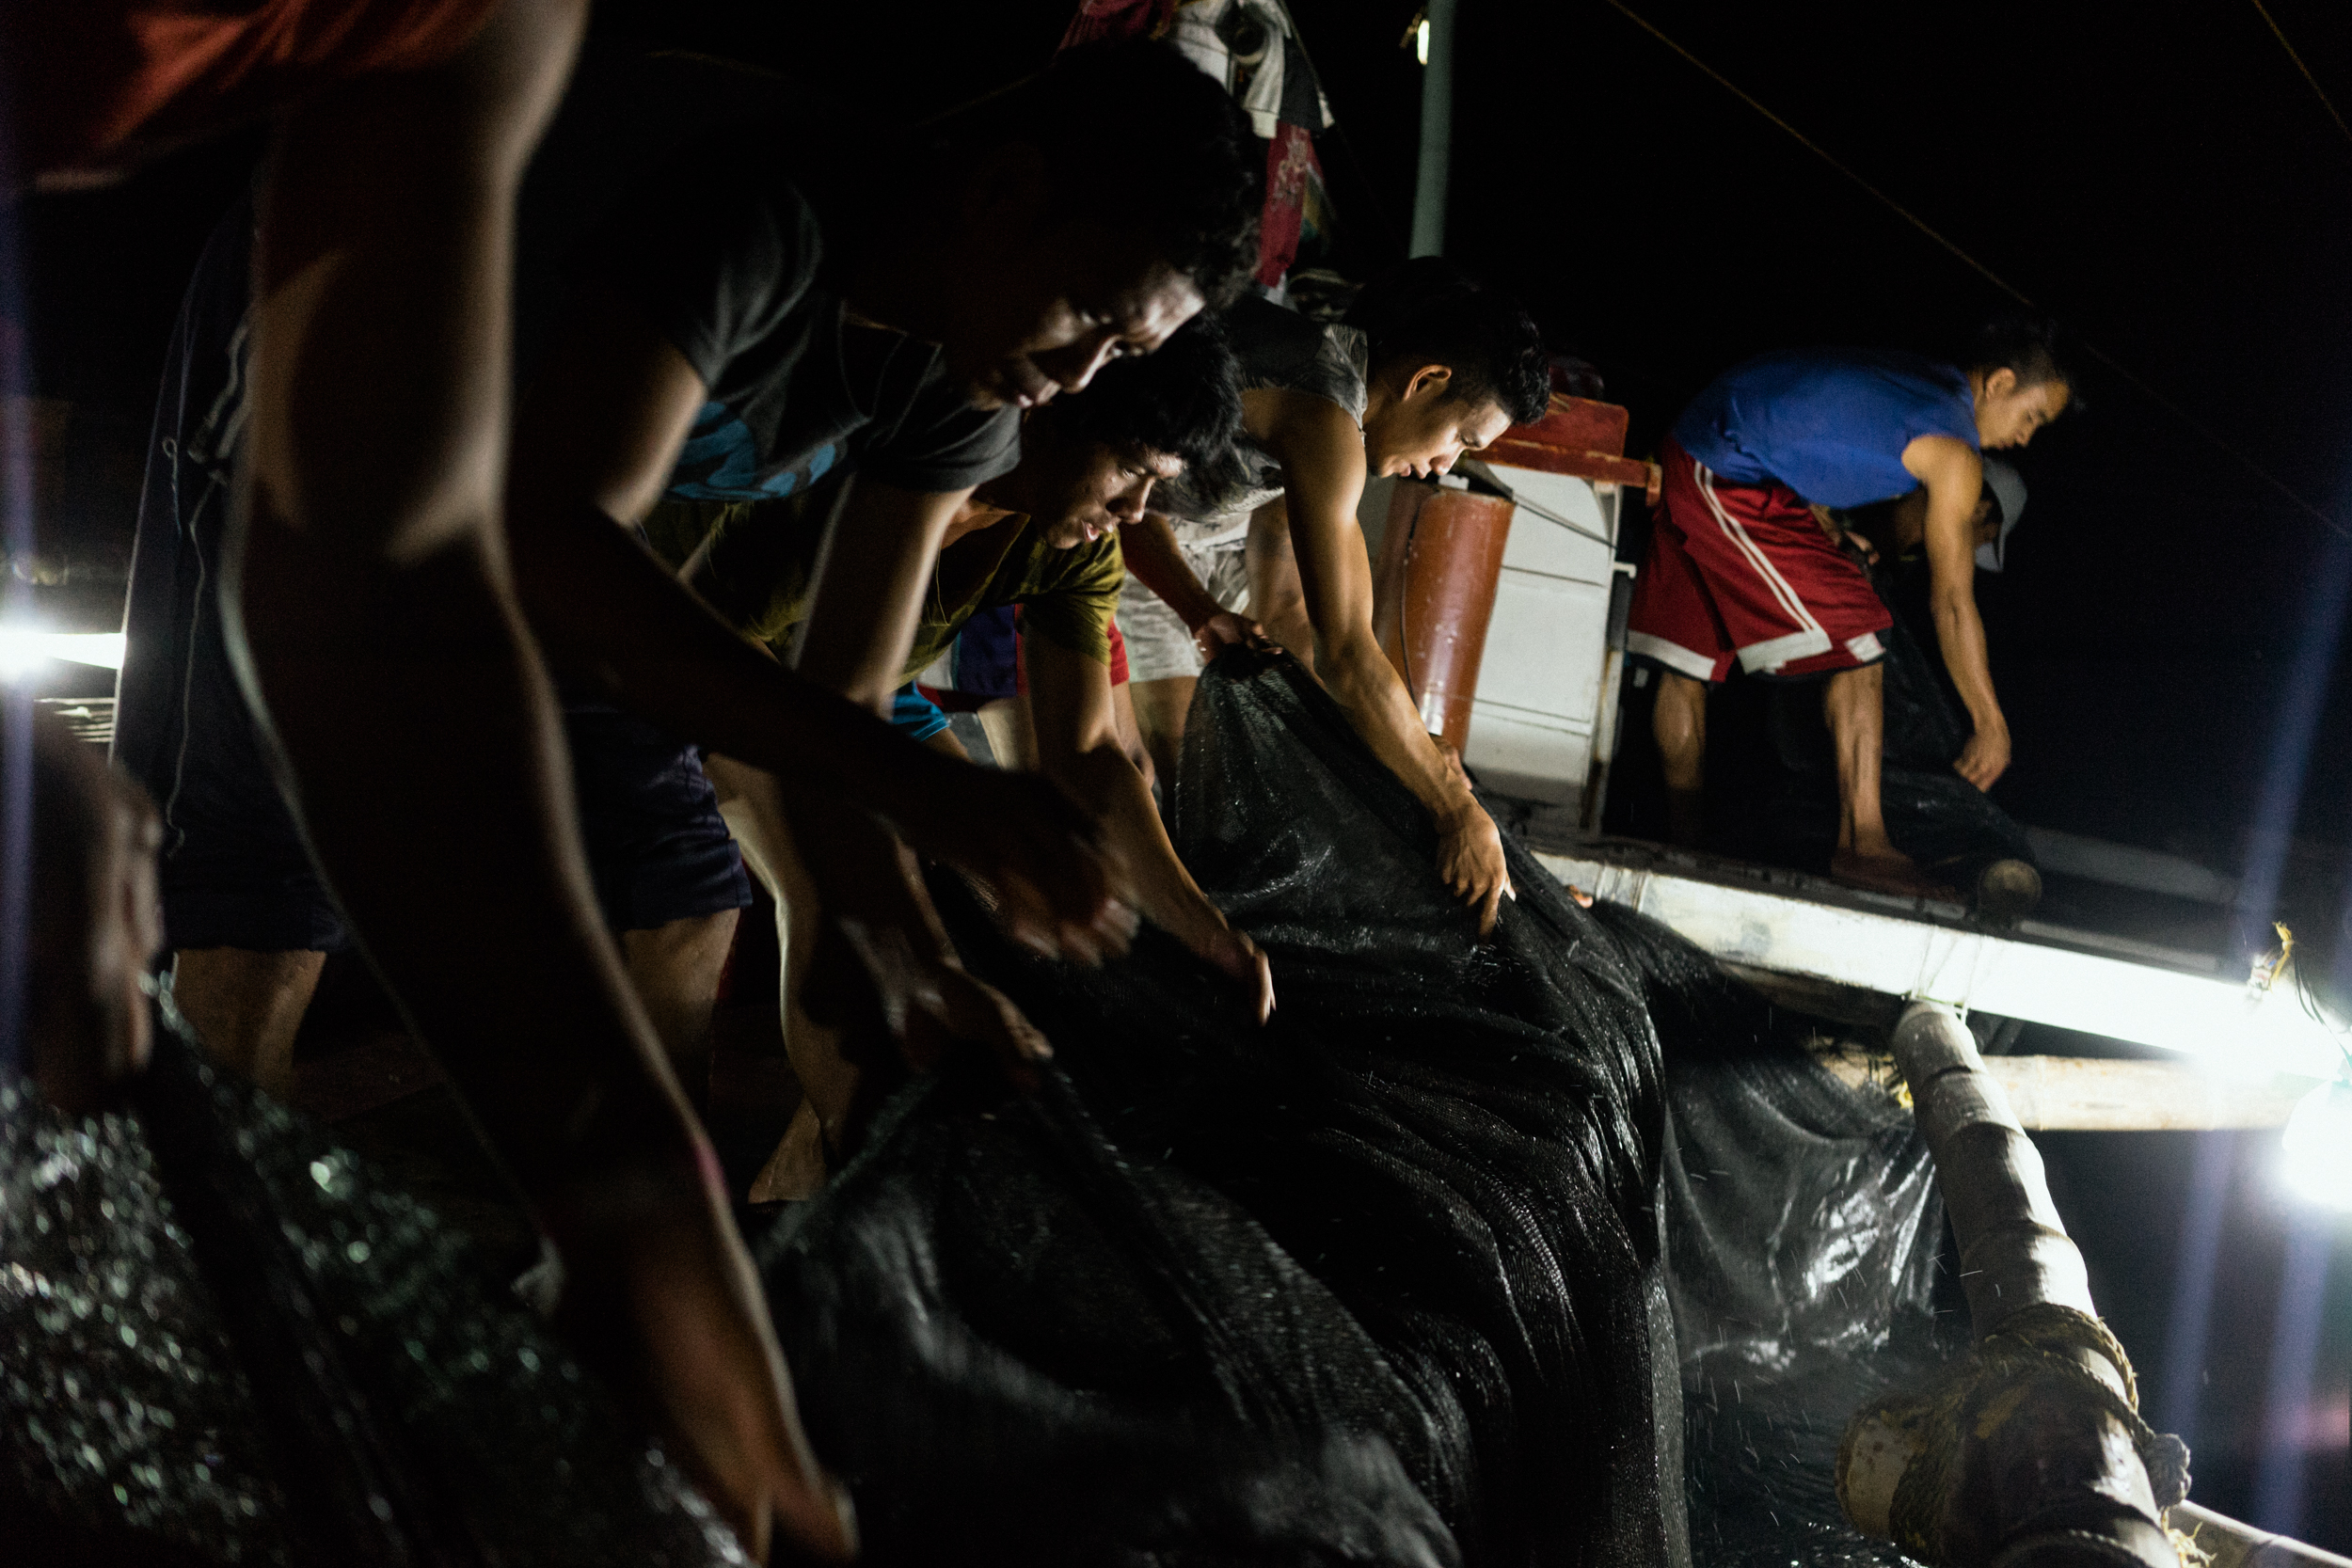  Kalibo, Philippines - September 21, 2015: The crew of a local fishing boat fish for their night's catch. Members of the crew, who make approximately 35 USD per month, have expressed their desire to work on a larger fishing vessel for the promise of 